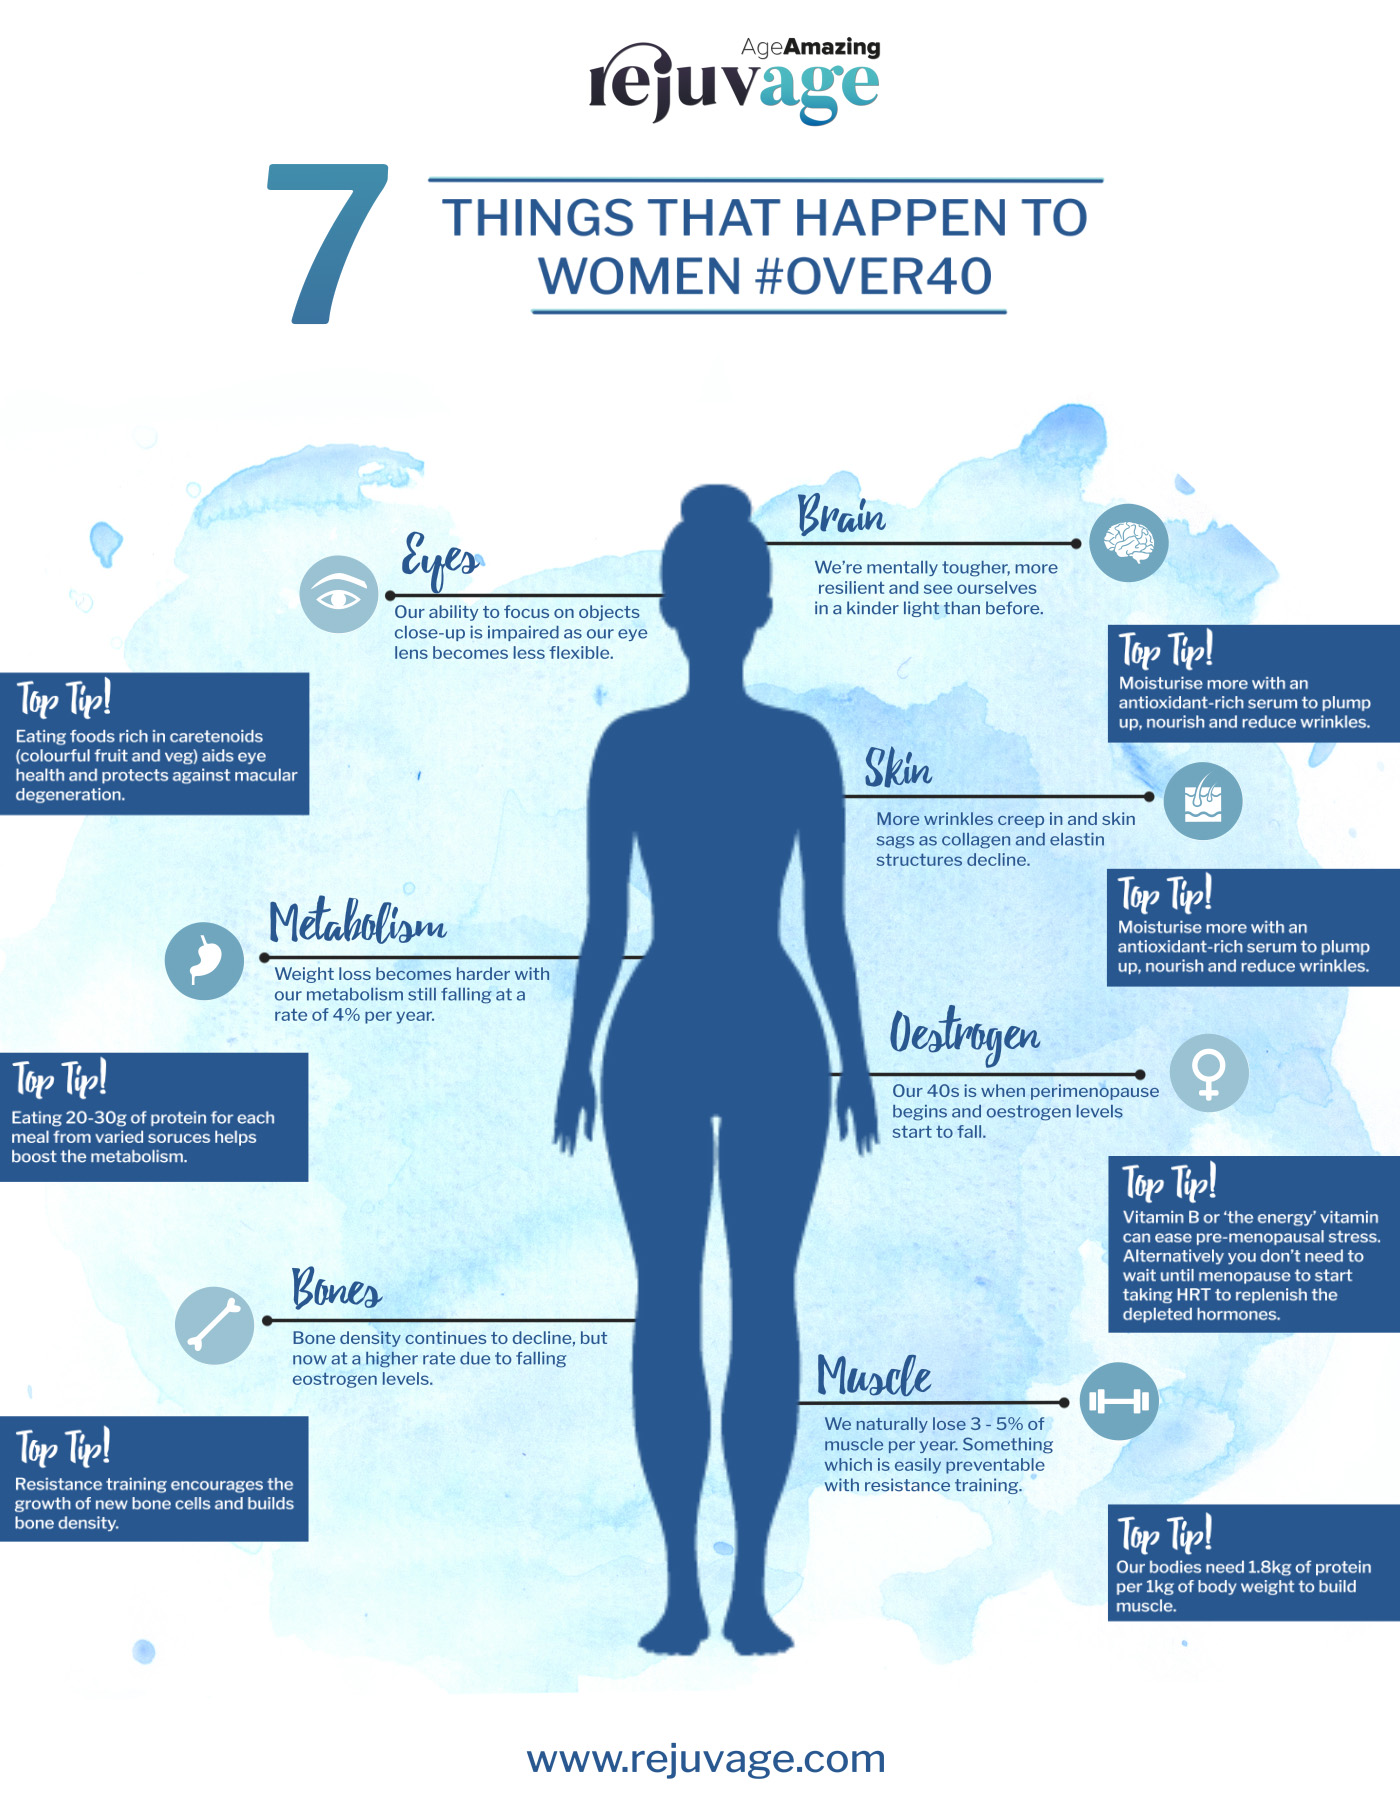 An infographic illustrating 7 things that happen to women once they turn 40.